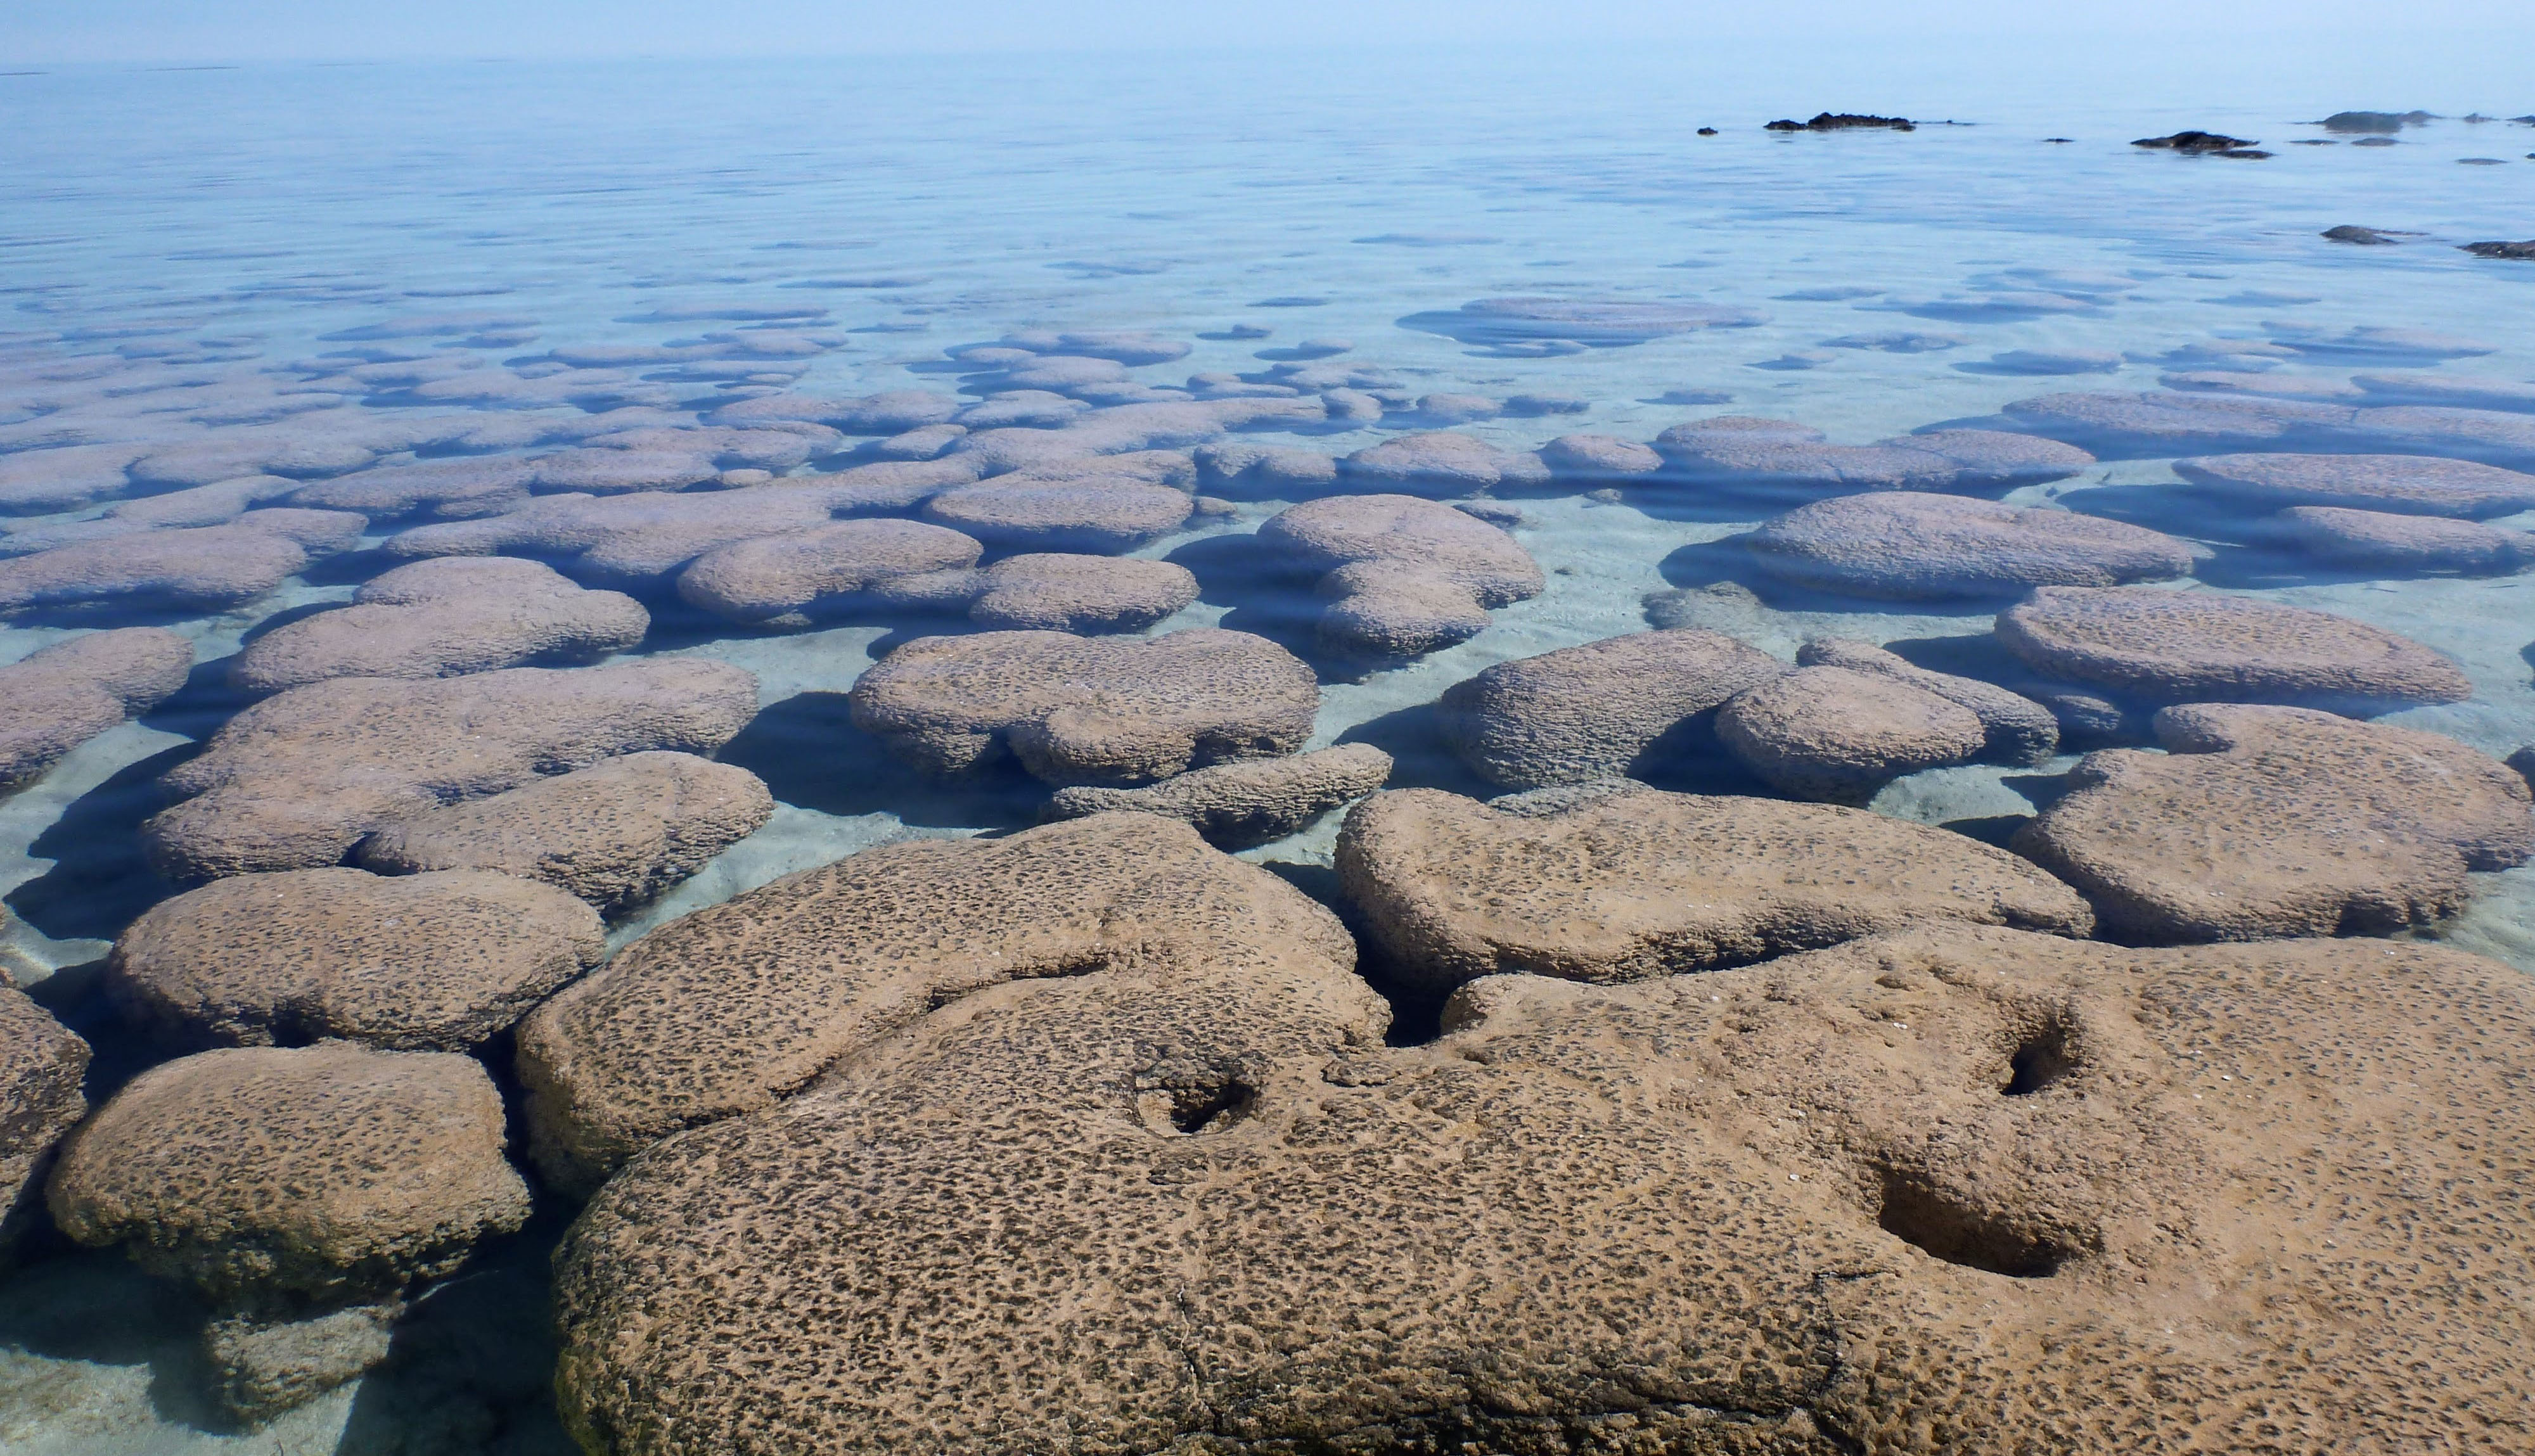 Photo of stromatolites in Shark Bay, Western Australia. Scientists have found evidence for ocean oxygenation happening at an earlier date than the Great Oxygenation Event in Mt. McRae Shale in Western Australia. Source: A. Anbar / ASU Image credit: None